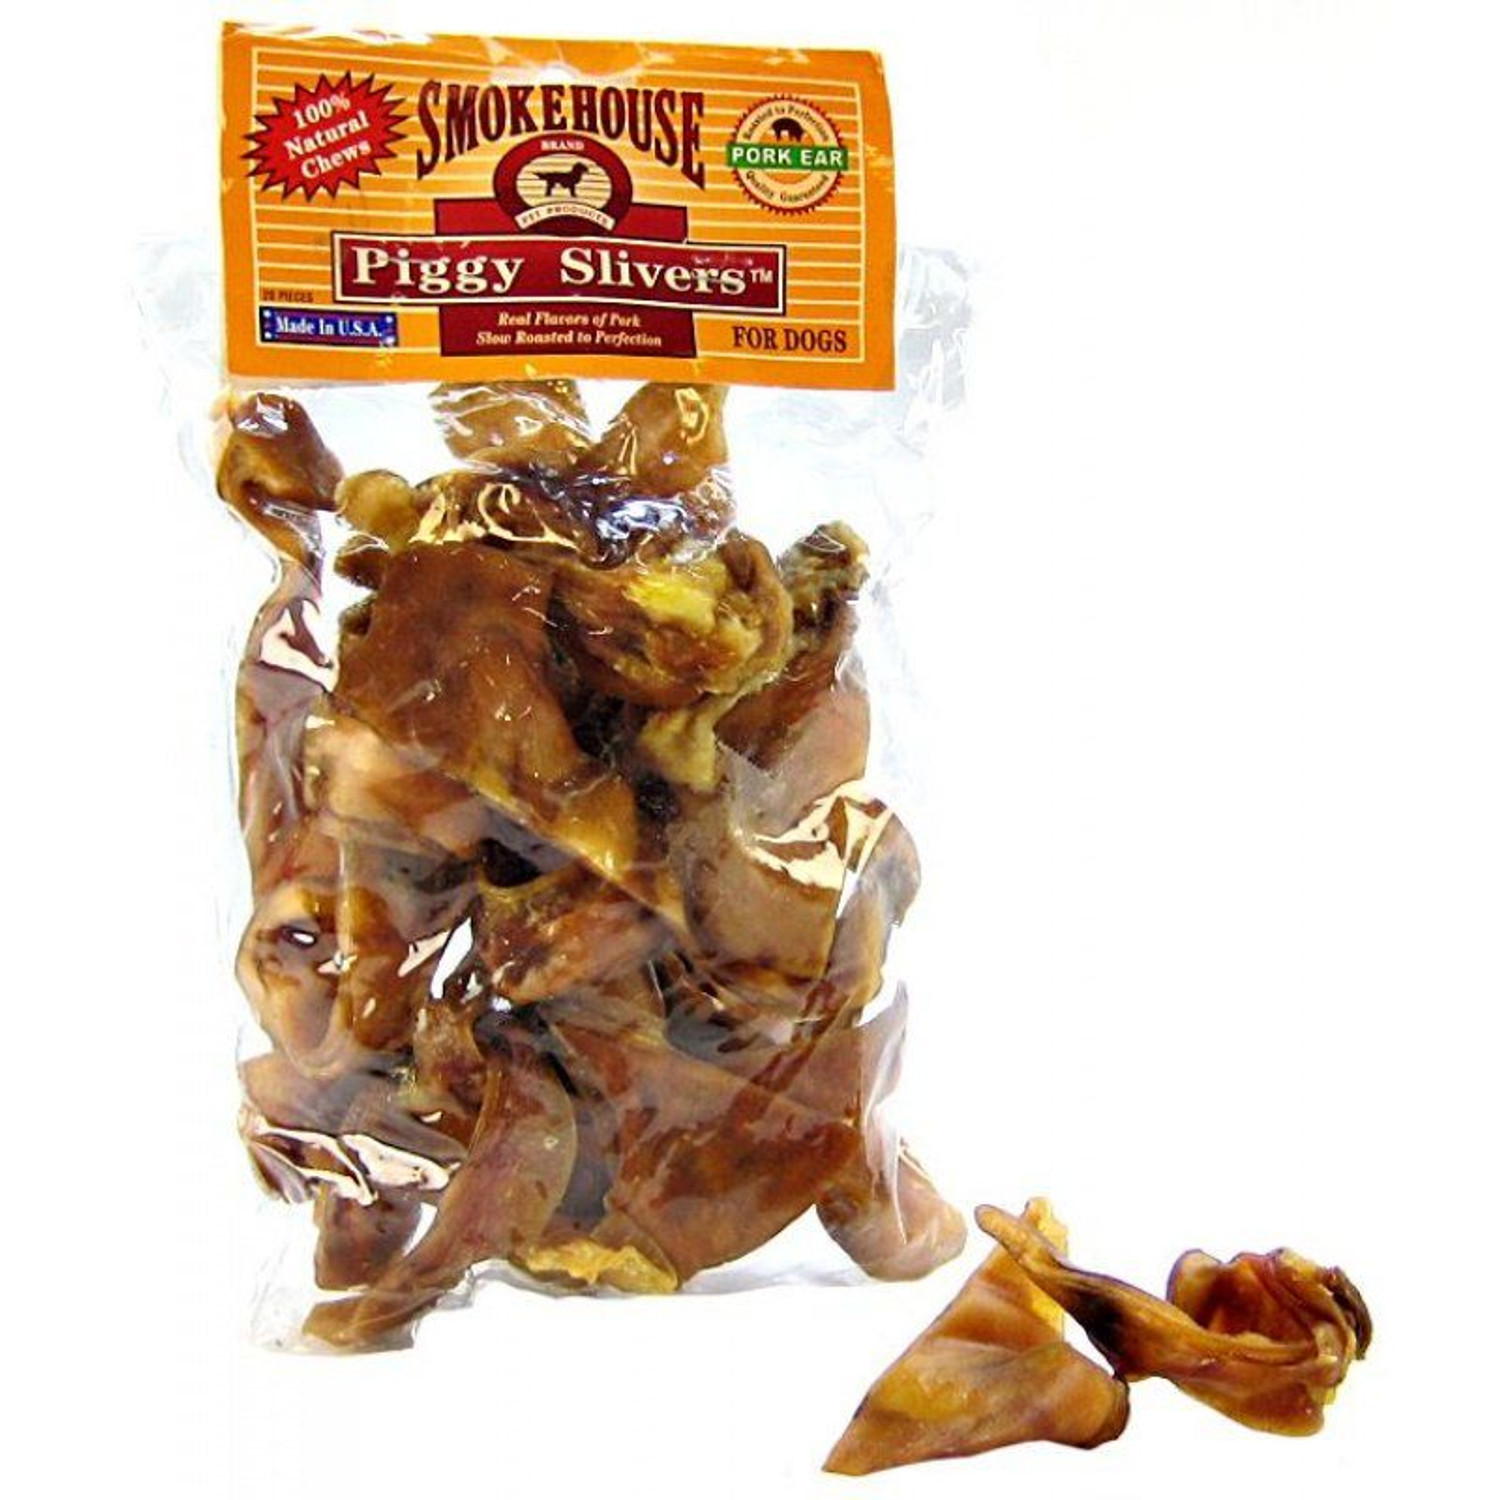 Smokehouse Piggy Slivers Dog Treats - Made in USA - 20 Count